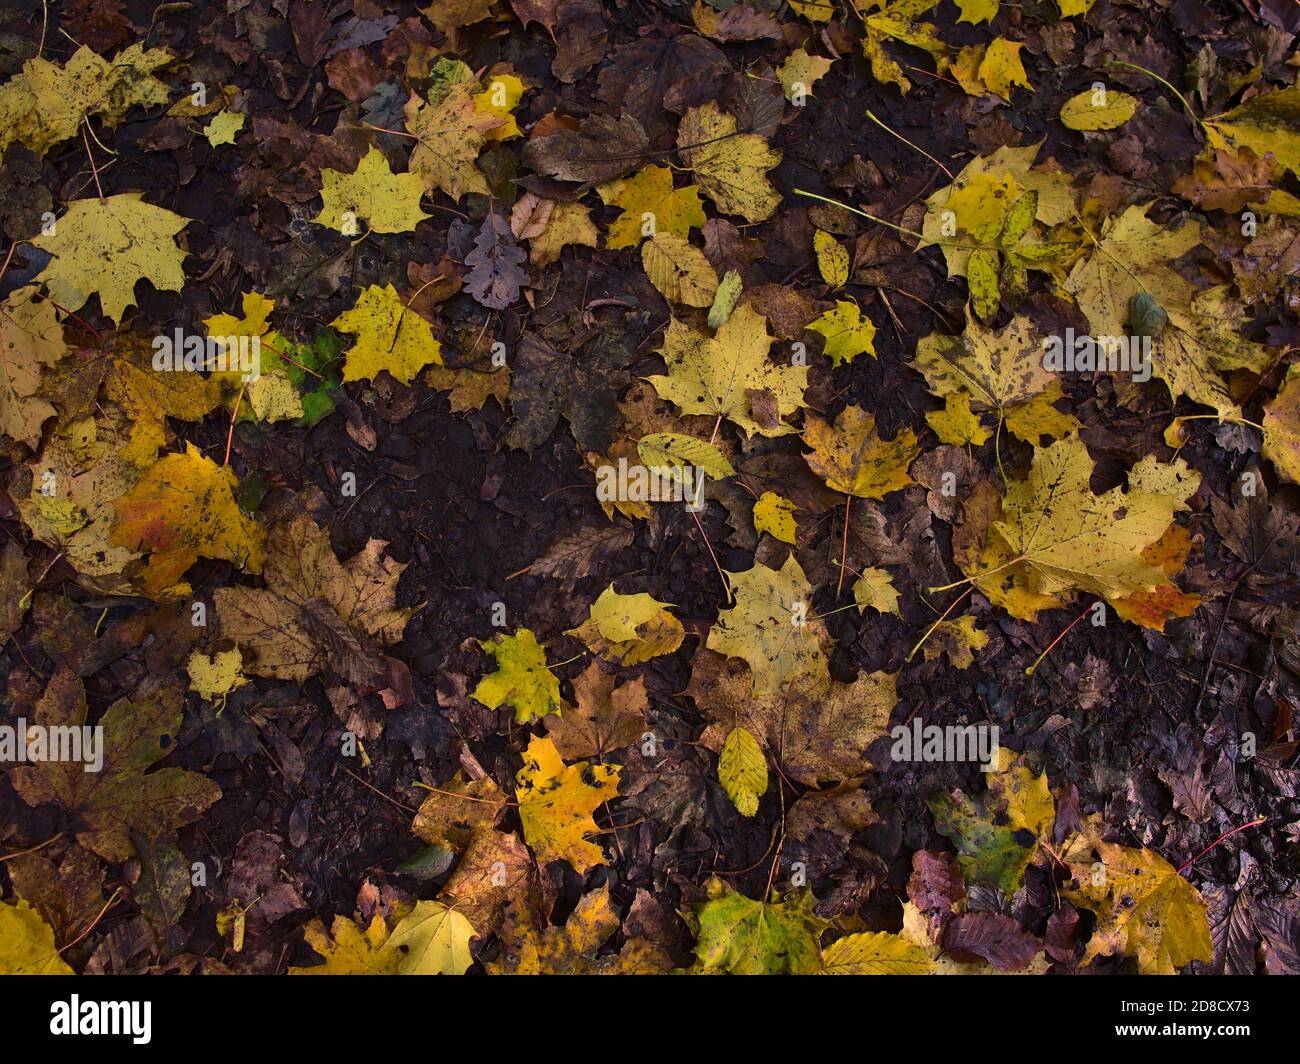 Mixed foliage of different trees (e.g. maple, beech) with withered and discolored yellow leaves on forest ground in autumn. Stock Photo